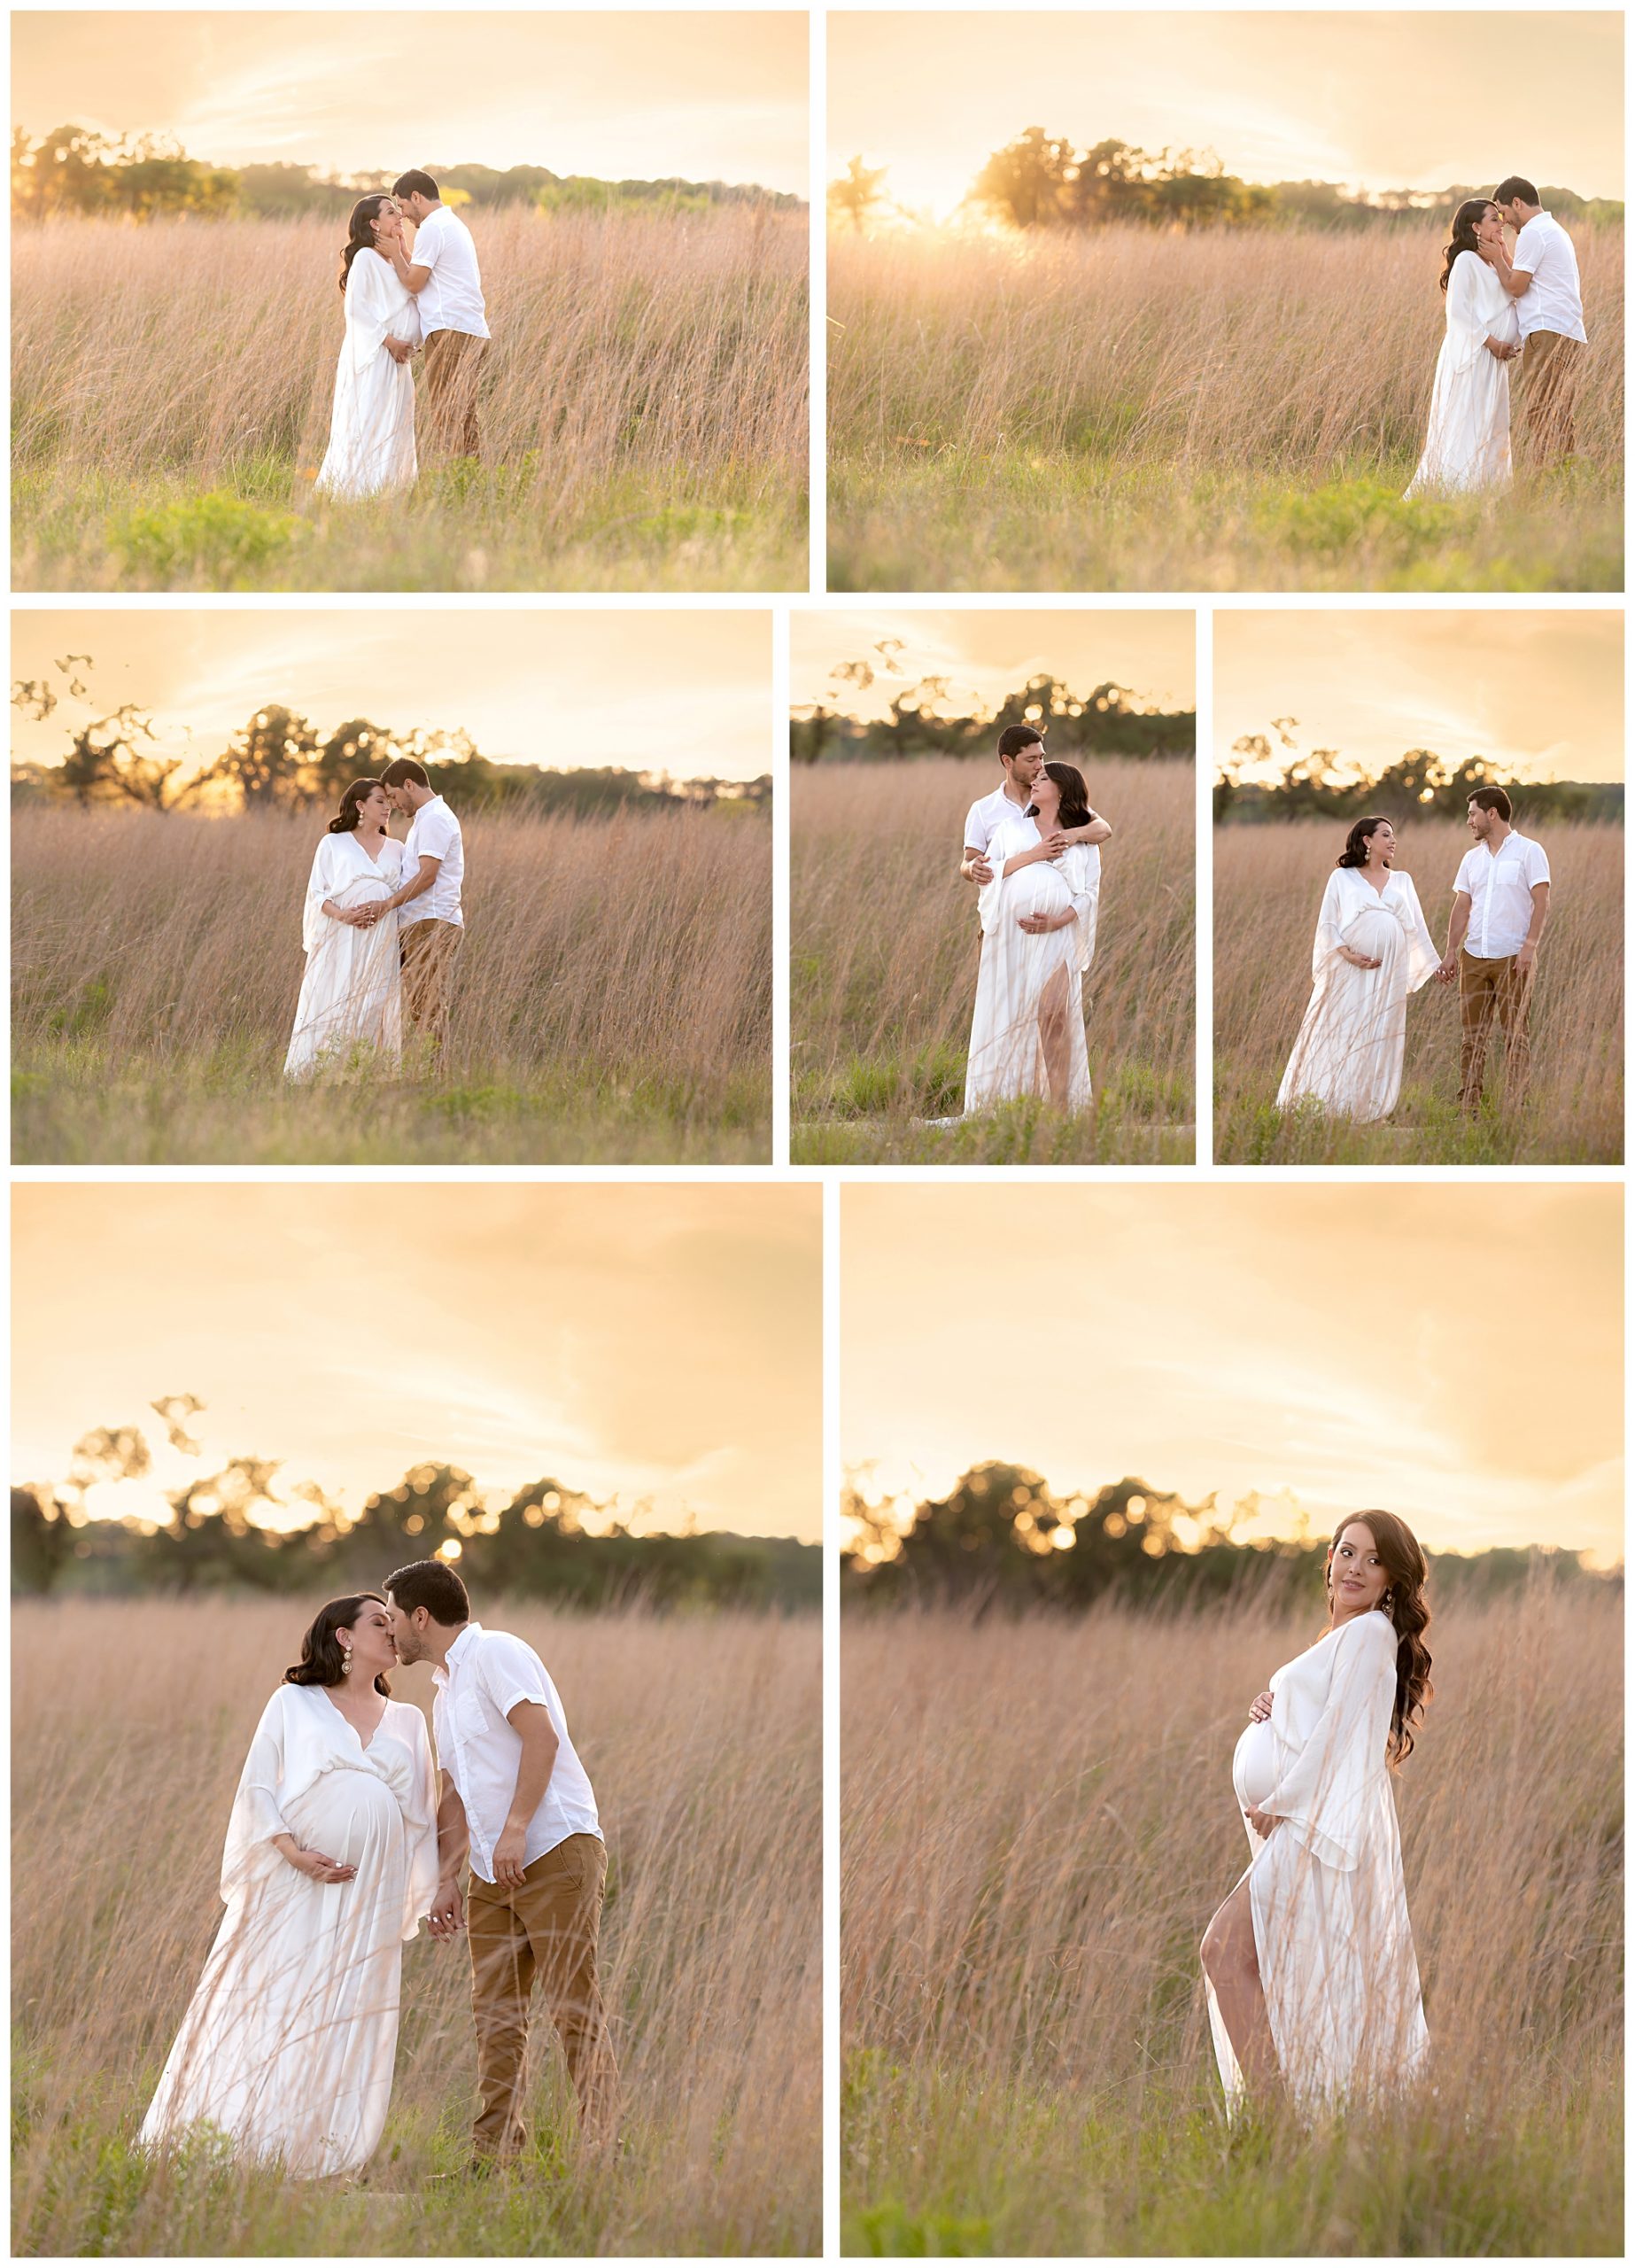 Pregnancy photoshoot collage with man and woman in front of sunset